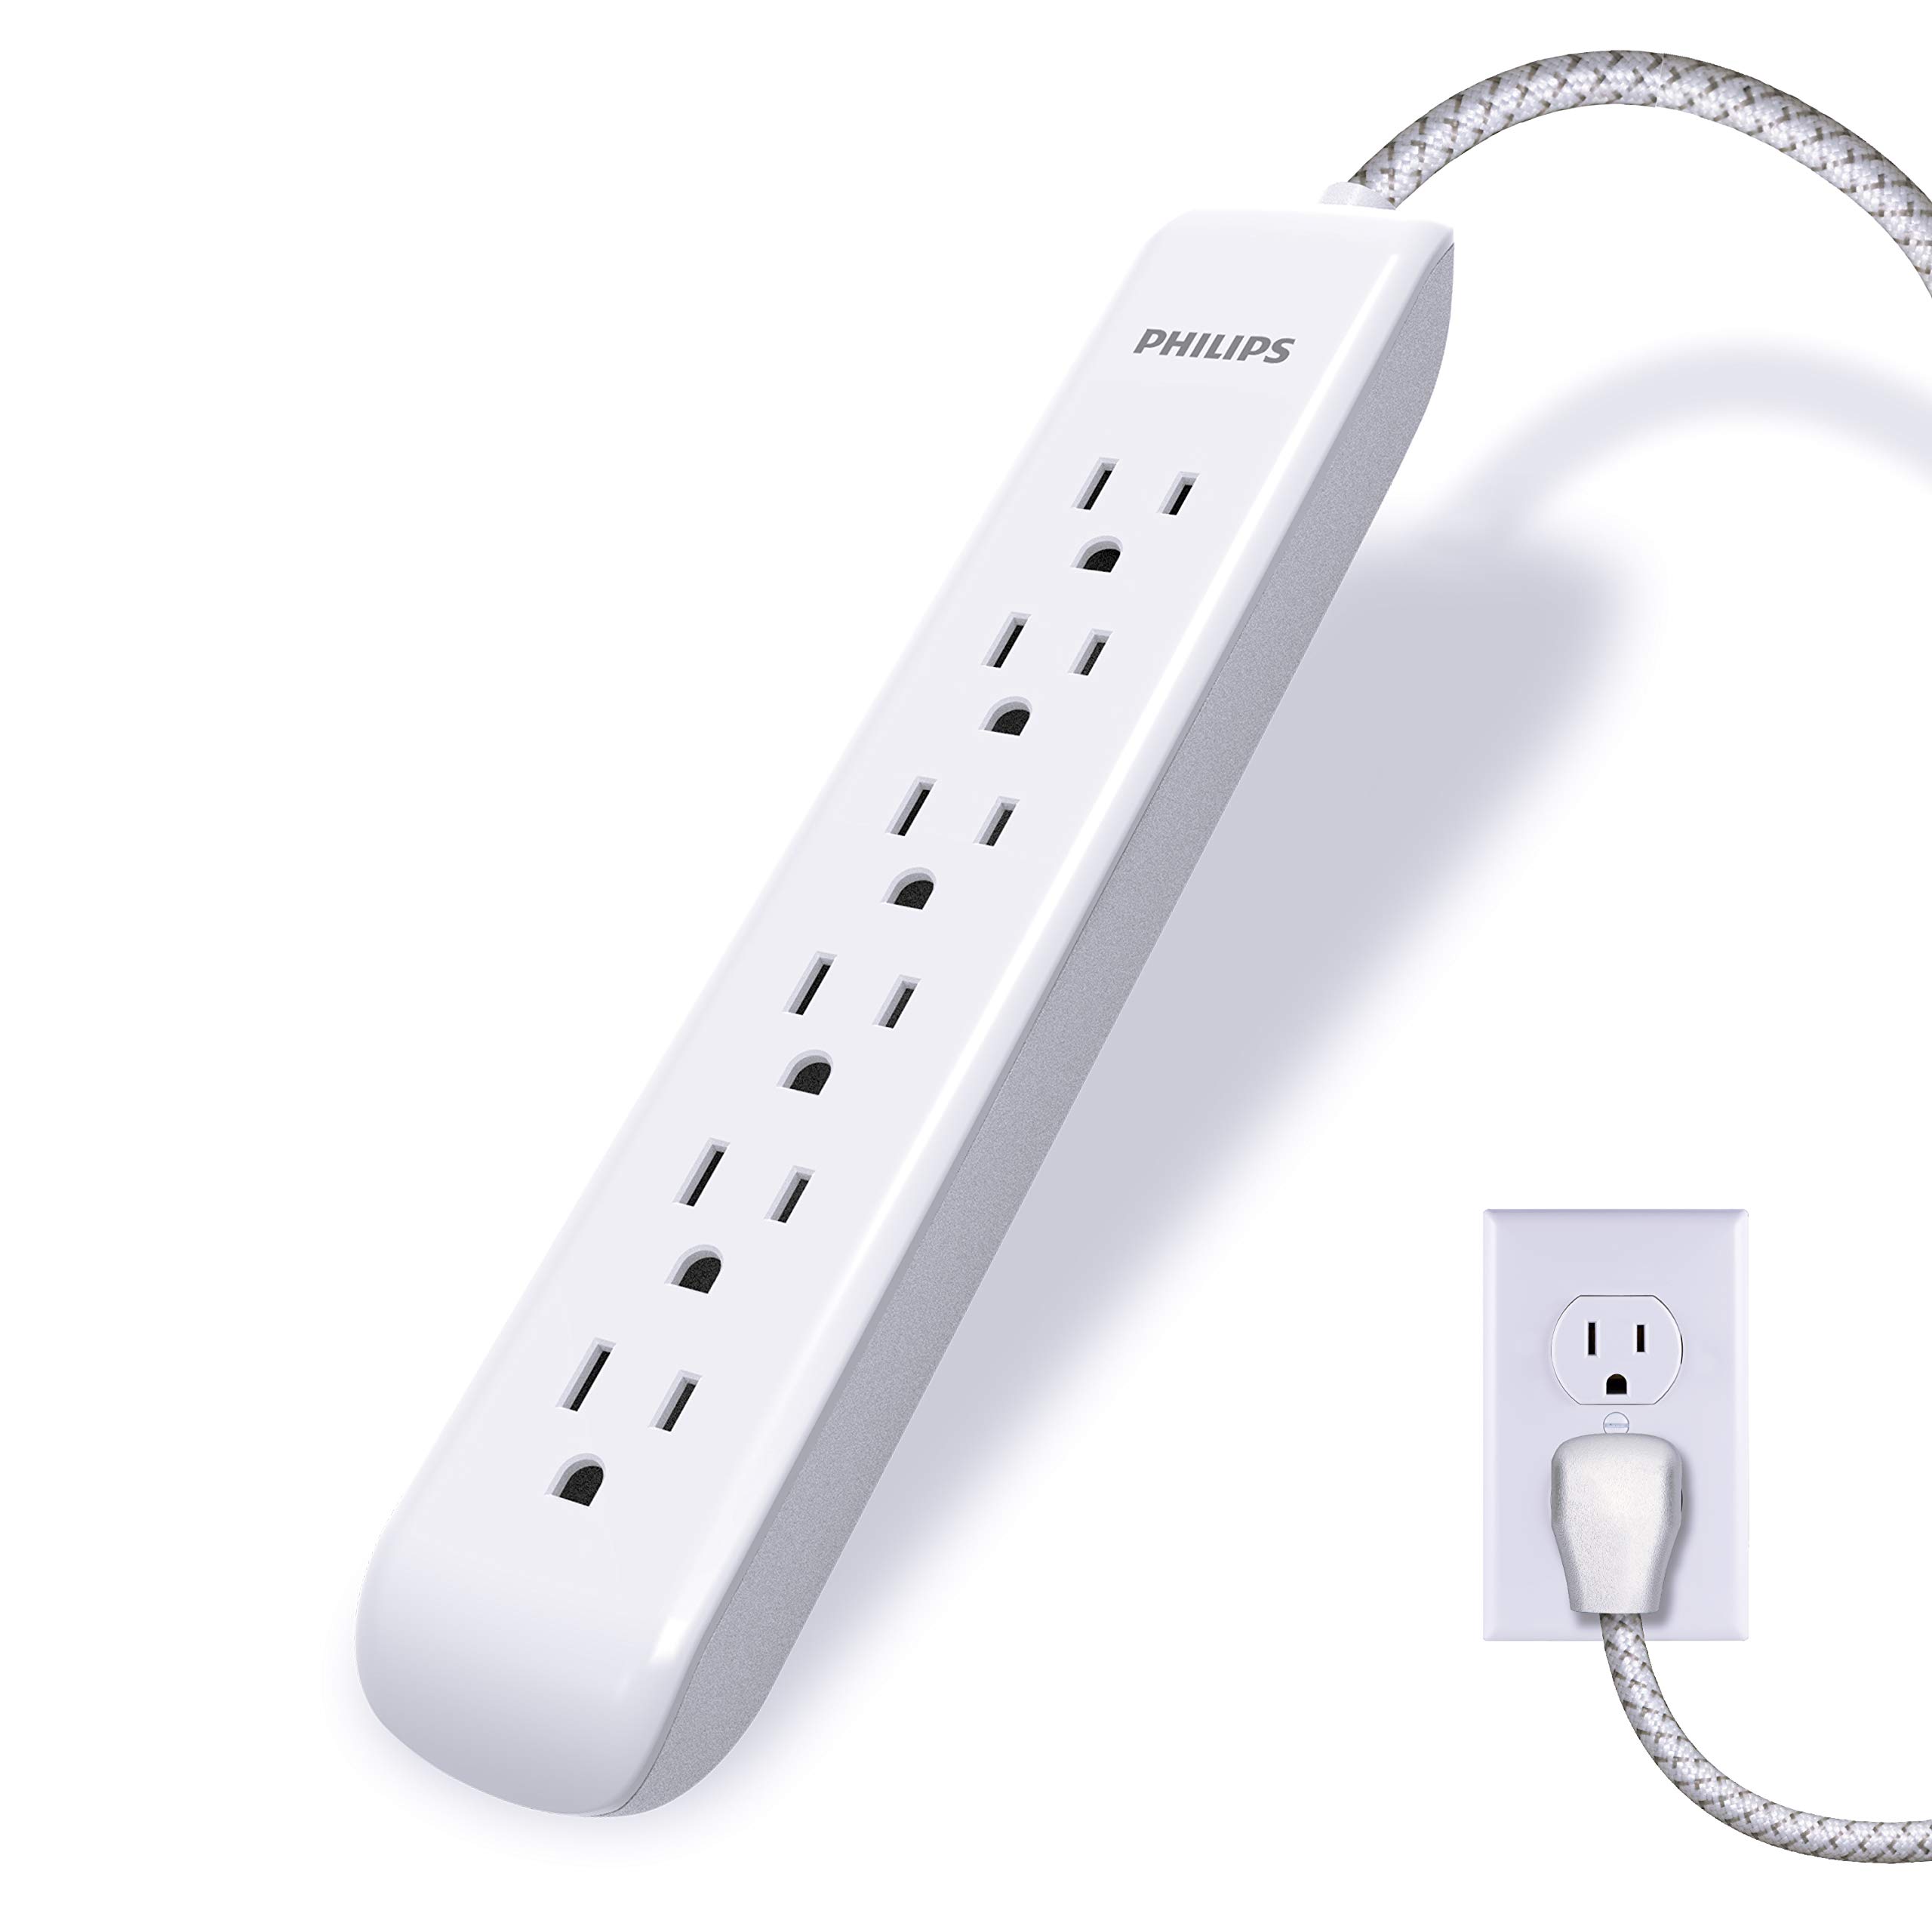 4' Philips 6 Outlet Surge Protector Power Strip w/ Designer Braided Power Cord & Flat Plug Extension (White) $7 + Free Shipping w/ Prime or on $35+